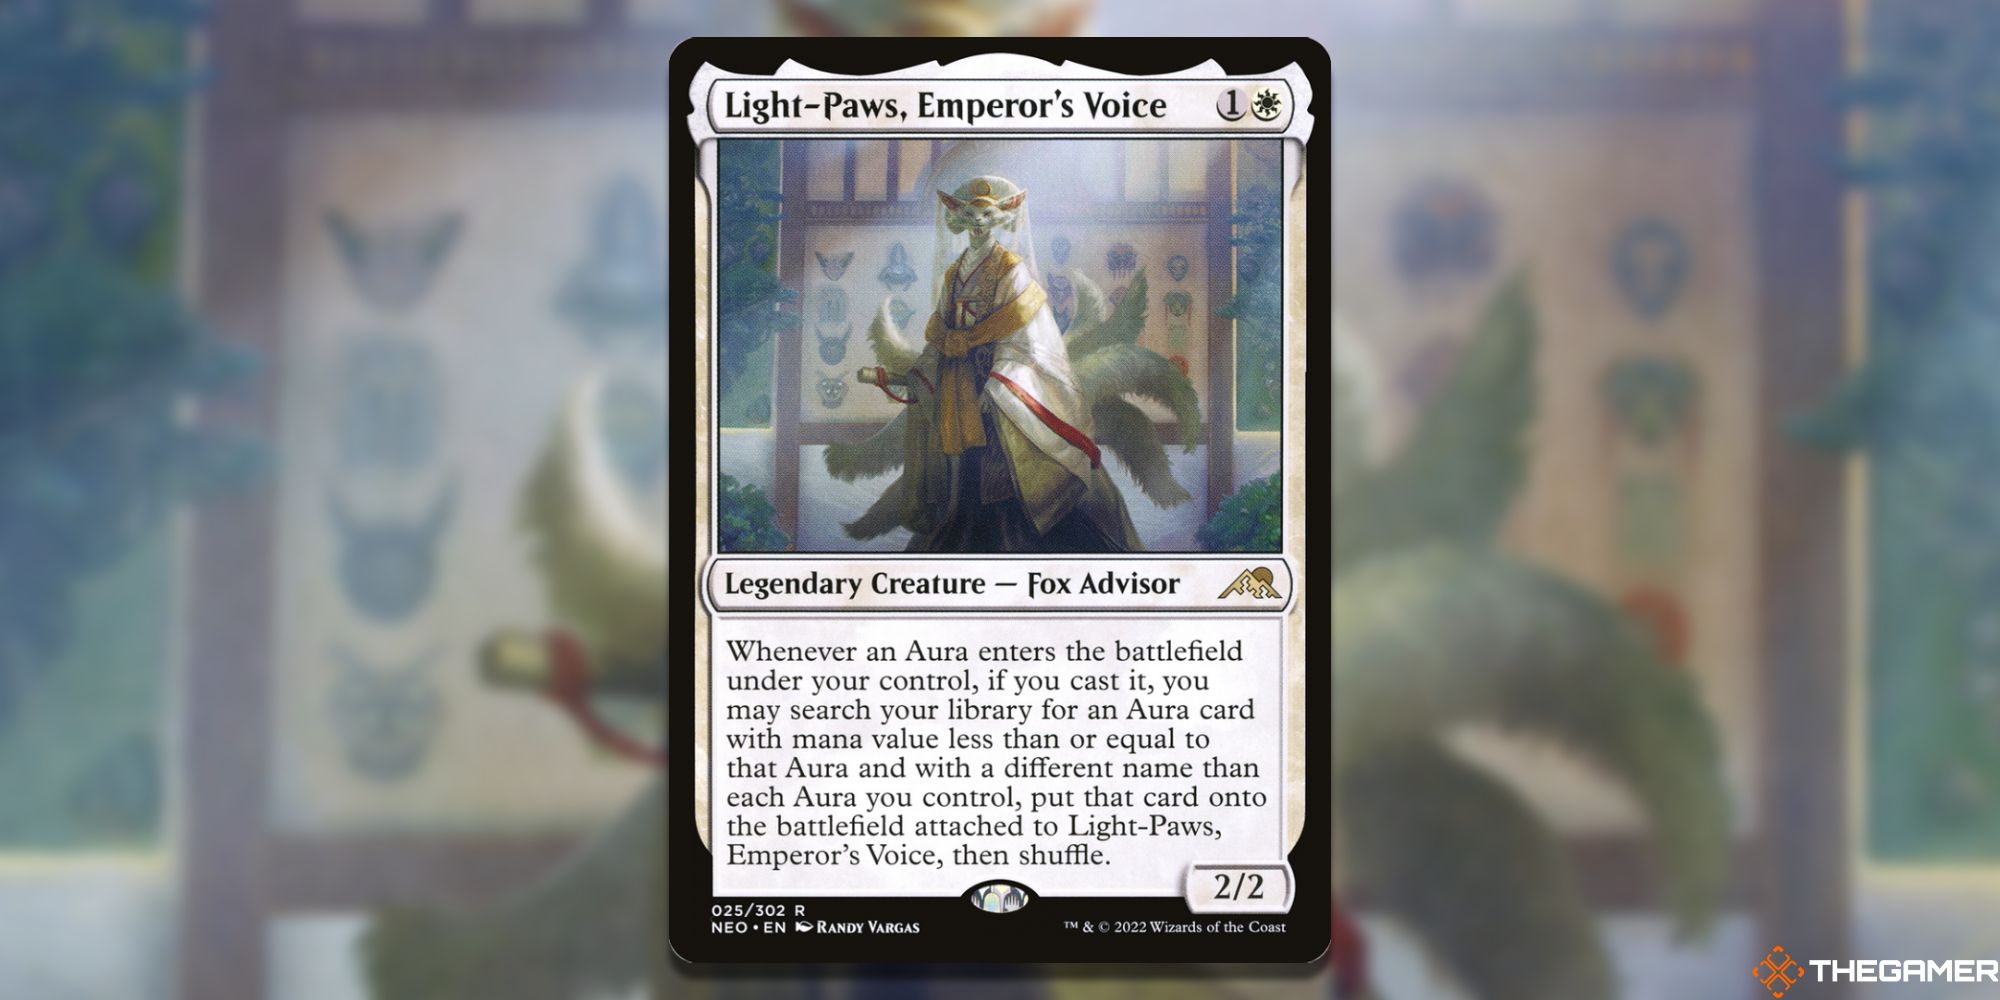 Image of the Light-Paws, Emperor's Voice card in Magic: The Gathering, with art by Randy Vargas